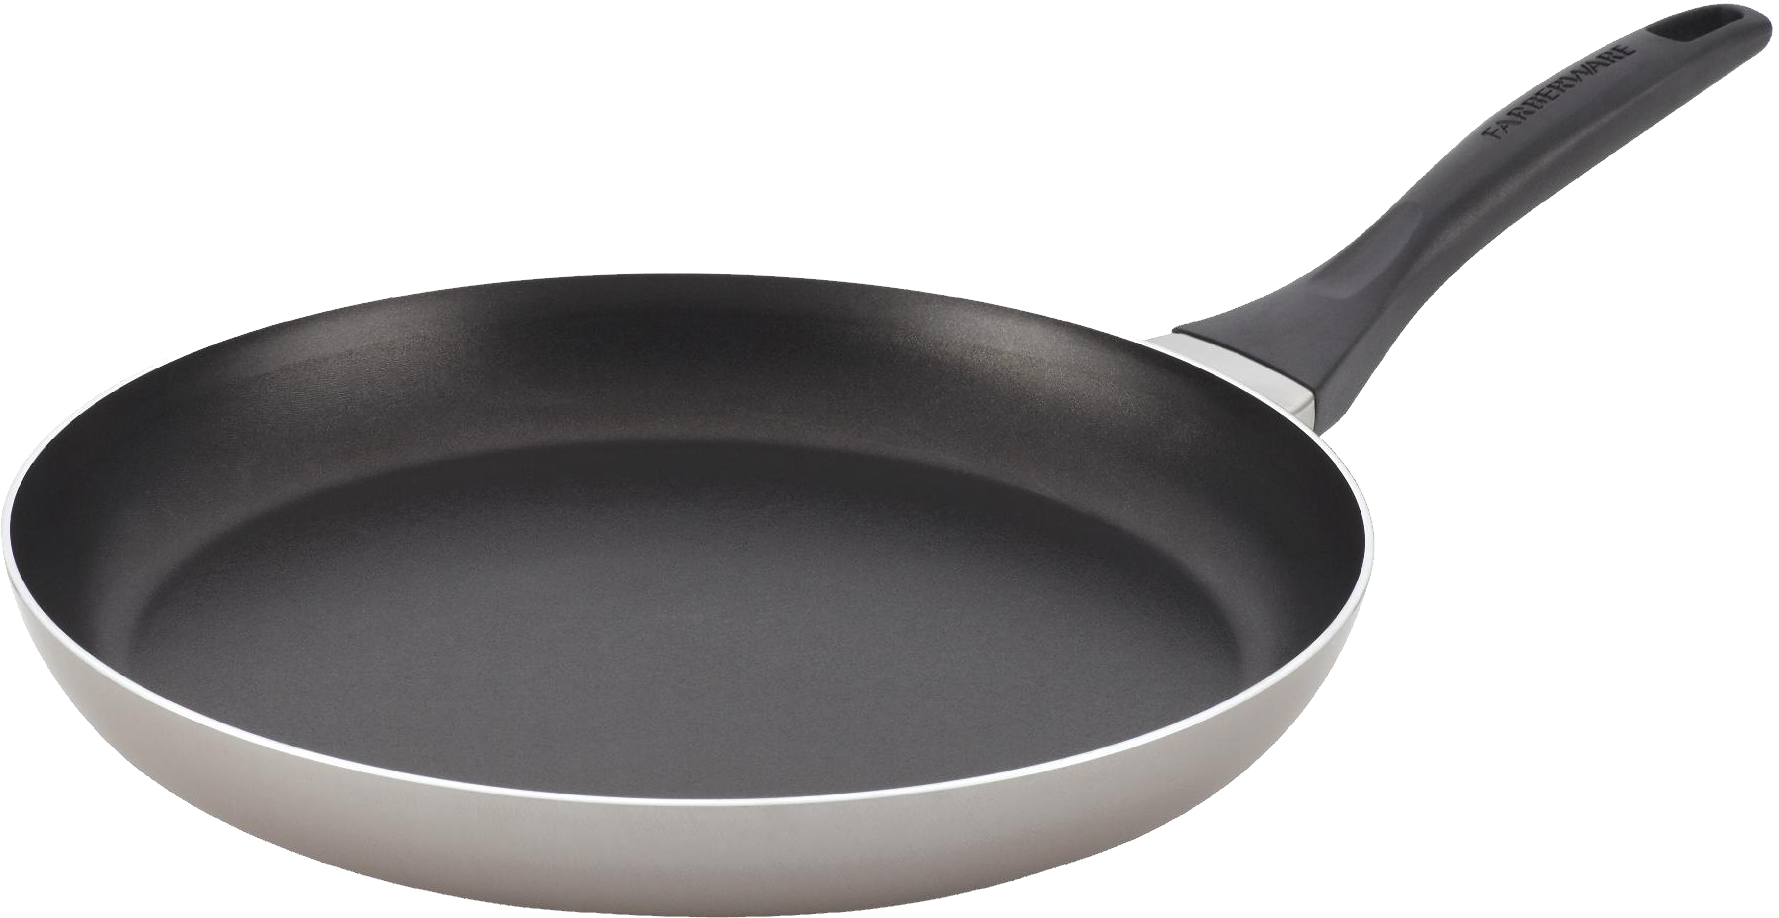 Frying Pan PNG Background Clip Art